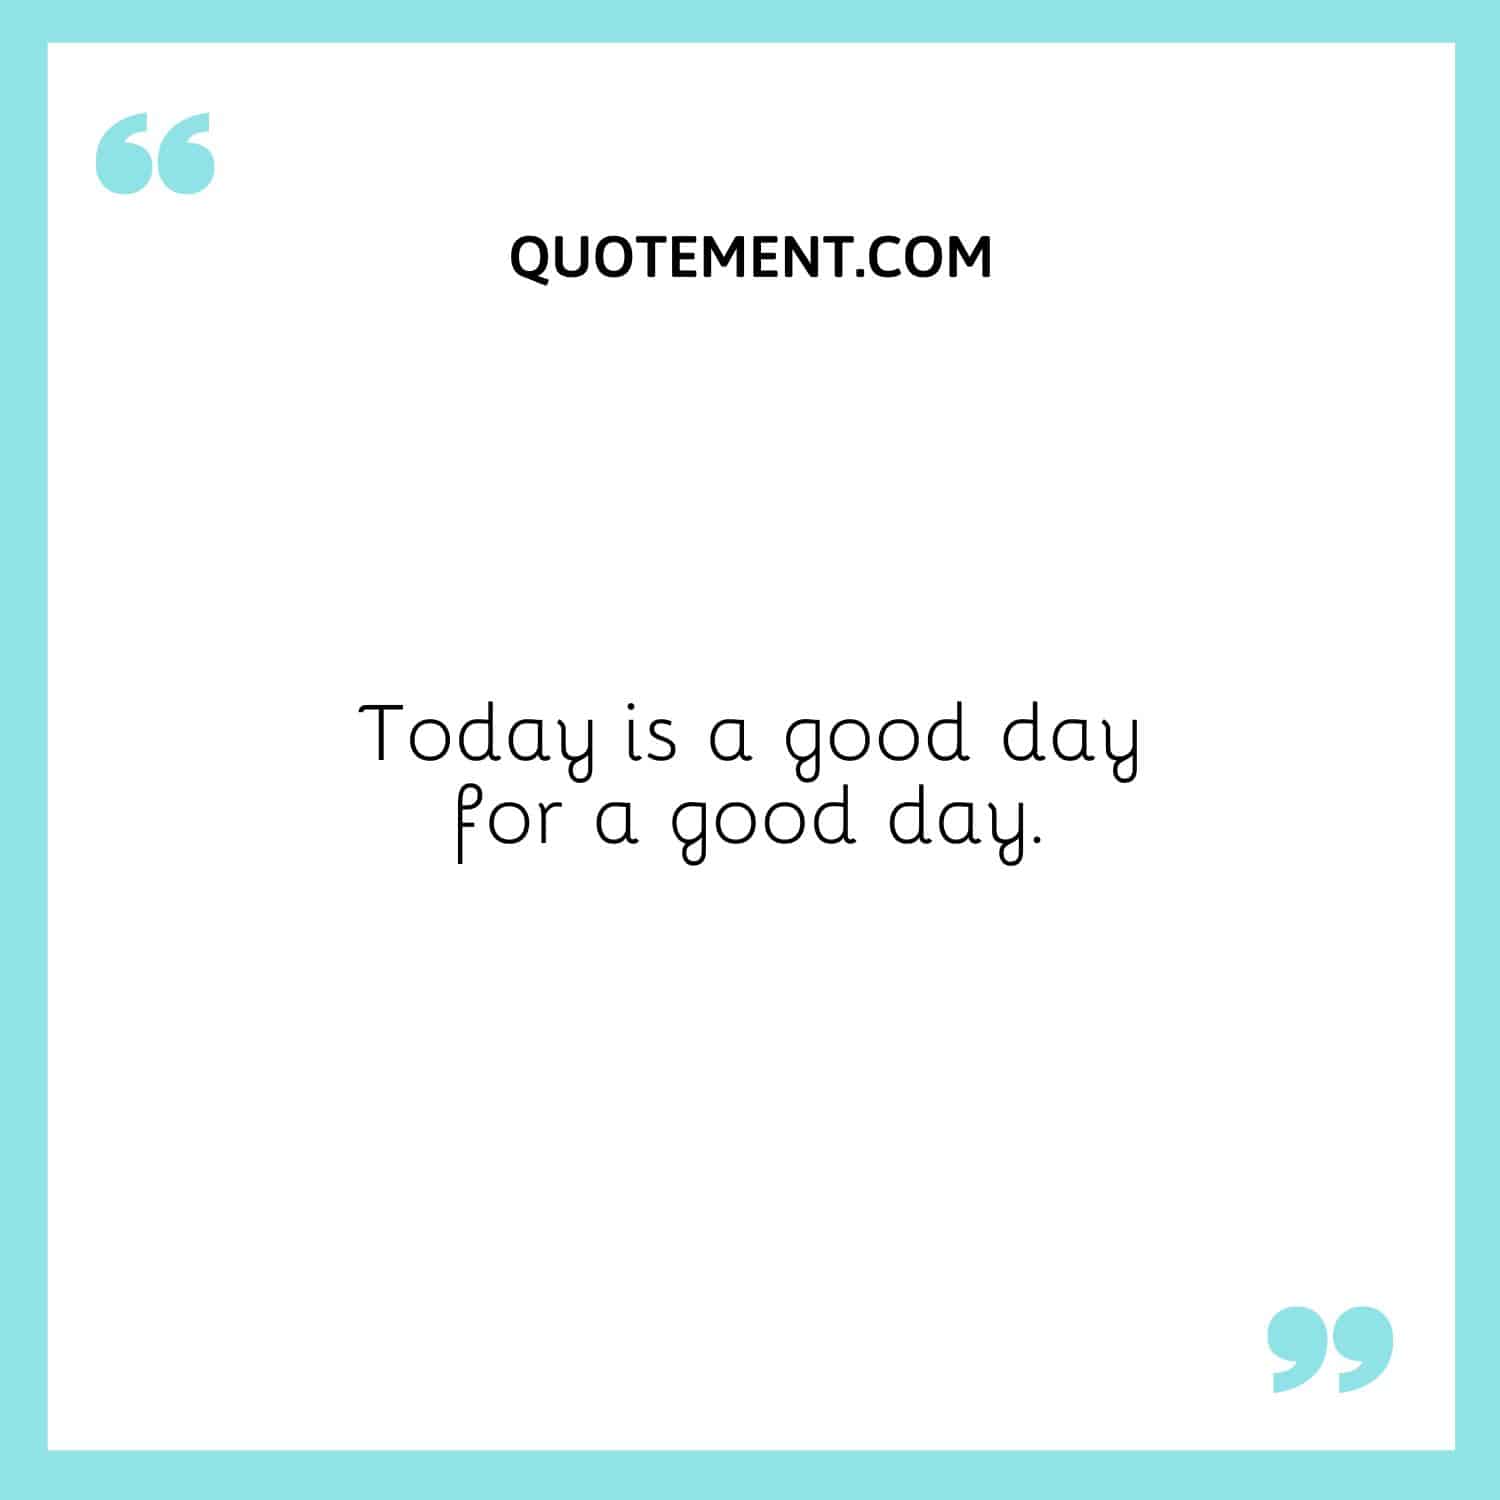 Today is a good day for a good day.